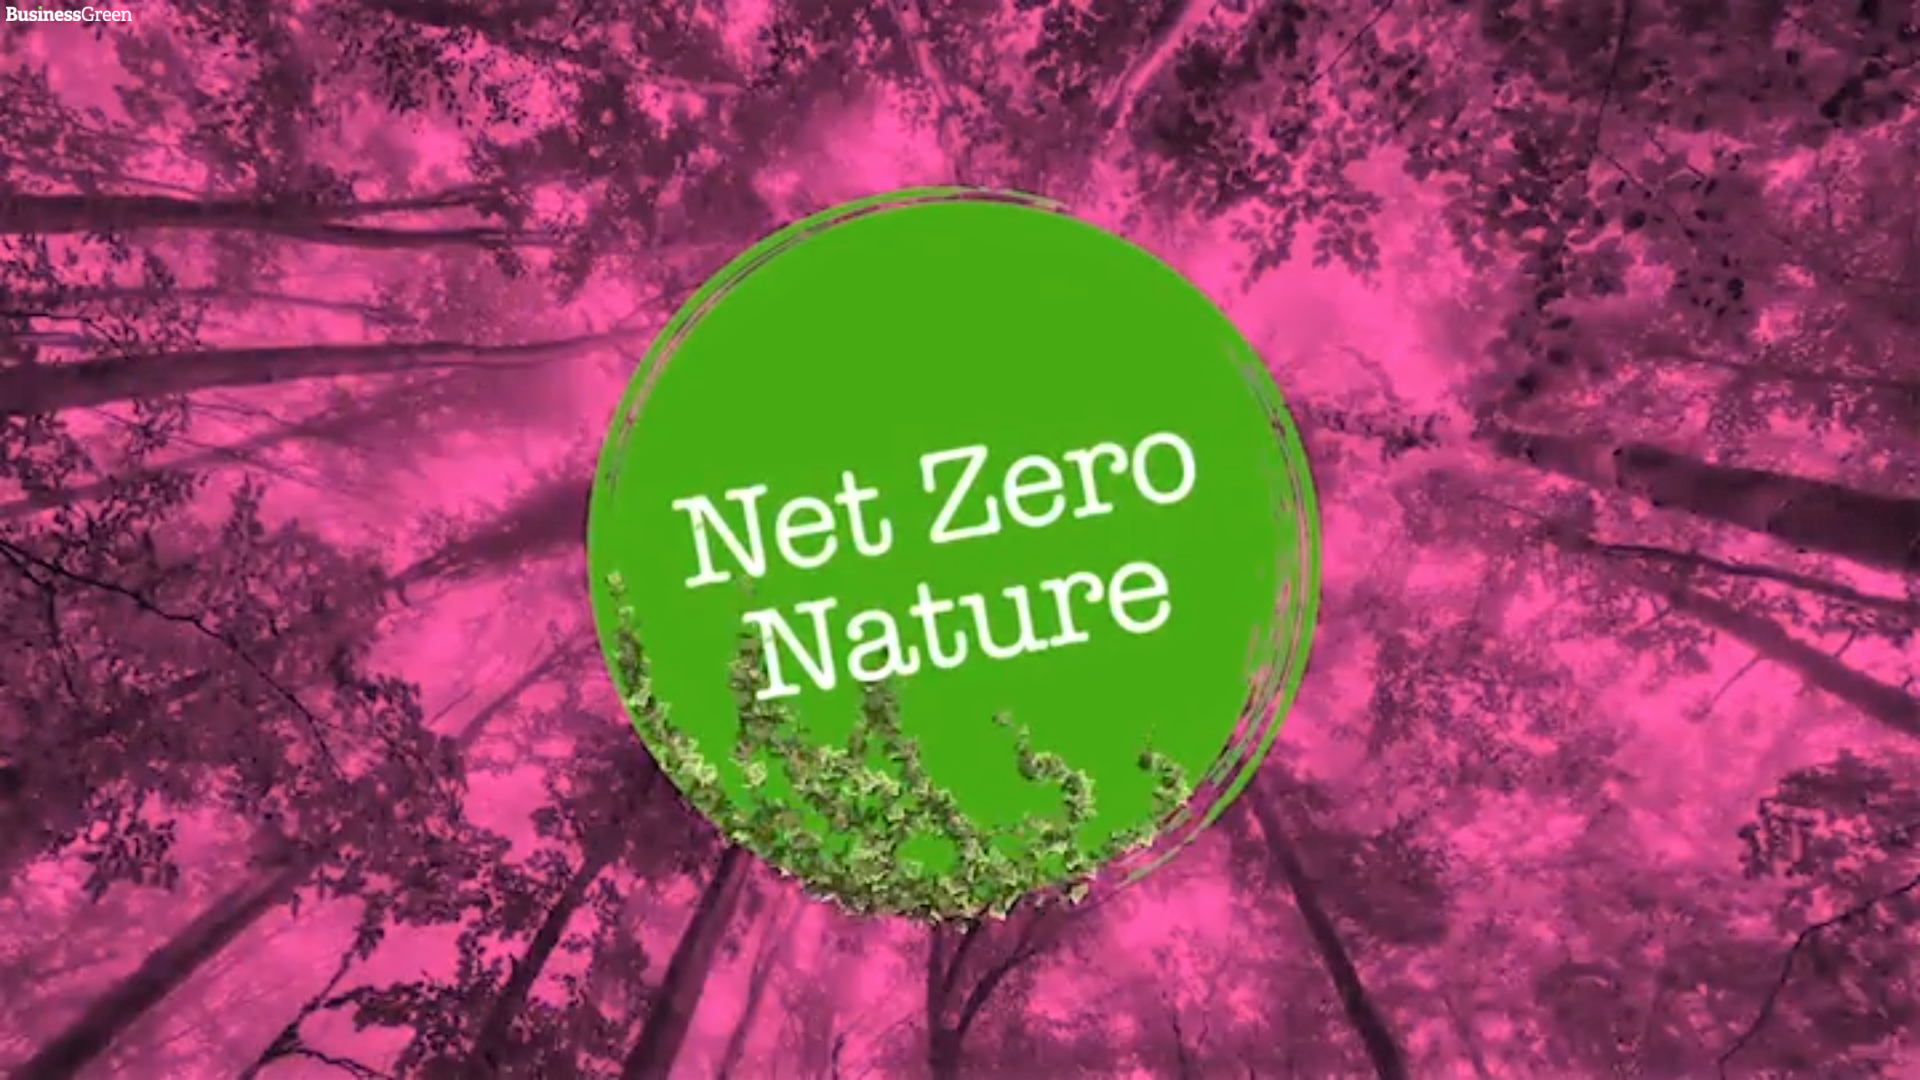 Net Zero Nature summit: Can carbon offsets be credible?